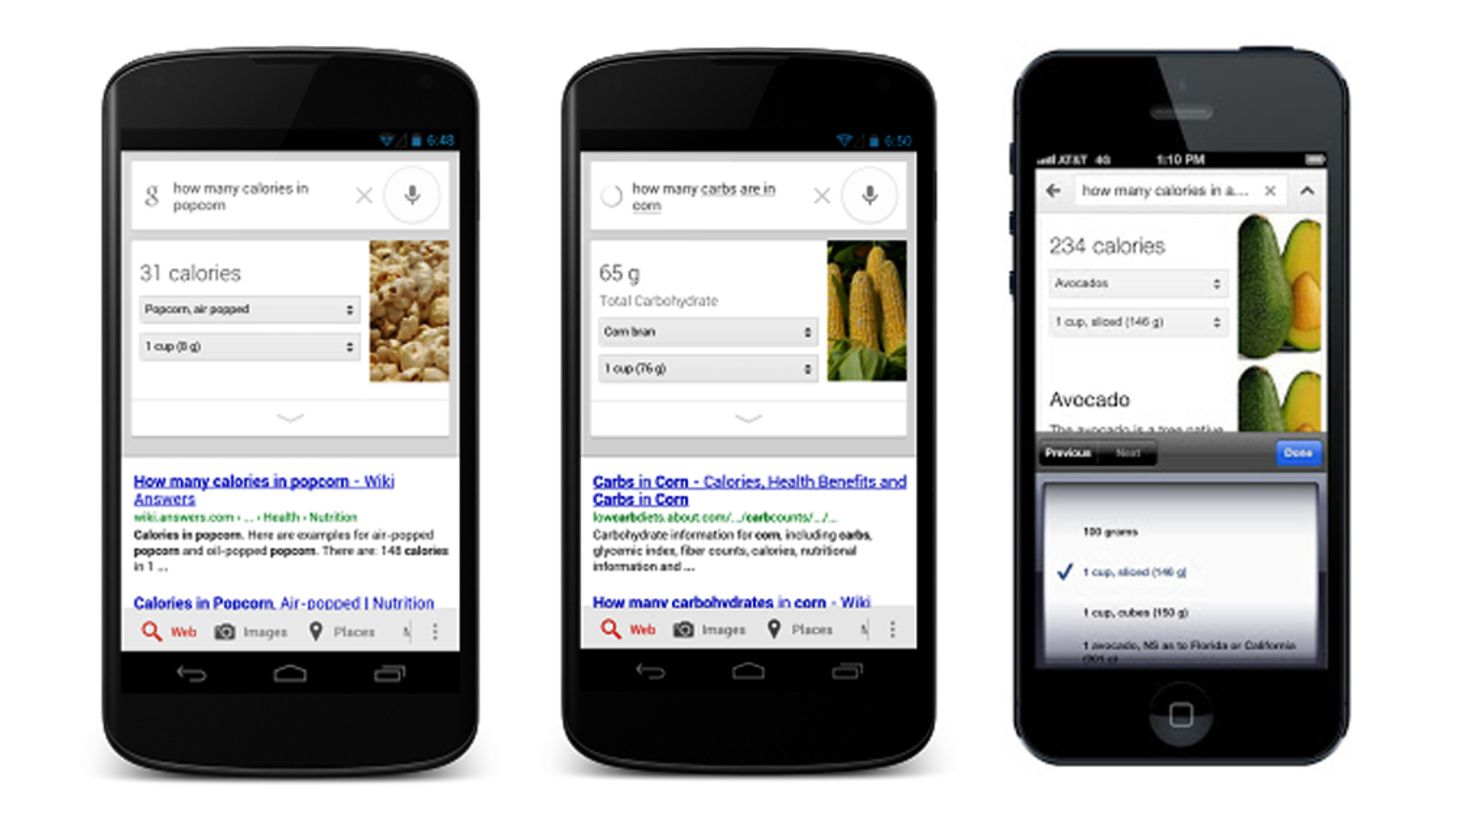 The Google nutrition search results are also available on mobile devices. 